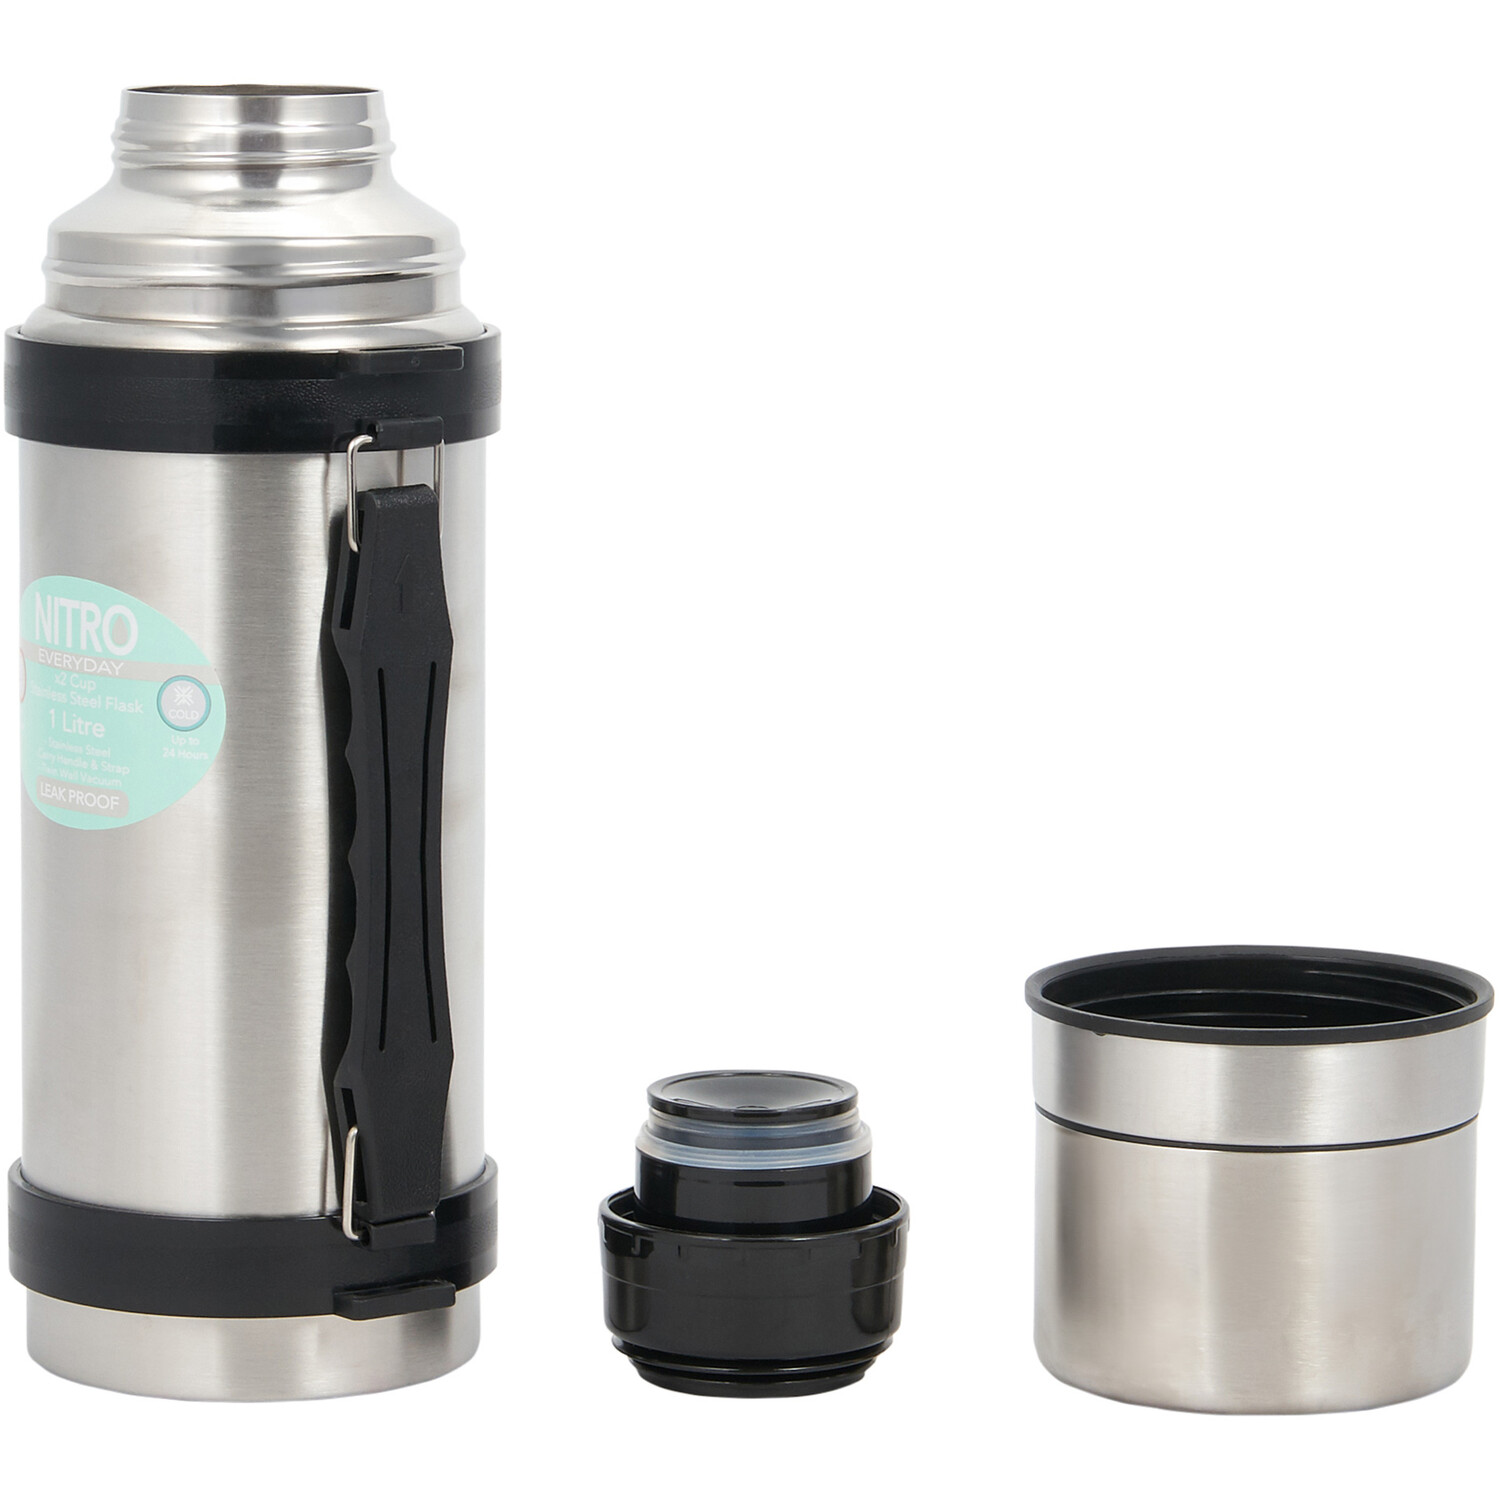 Nitro 2-Cup Flask - Silver Image 4